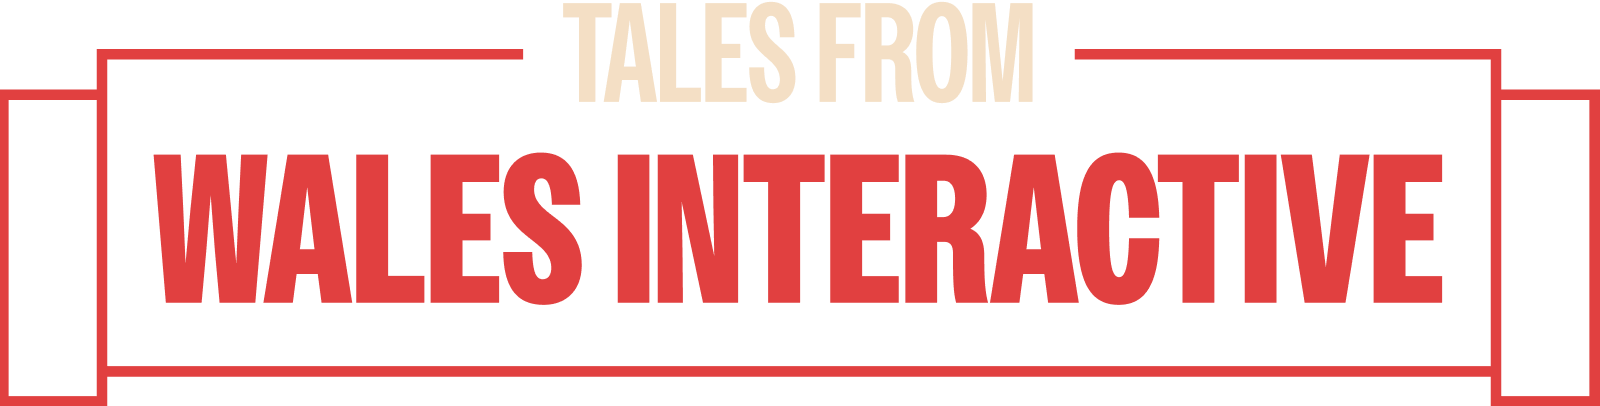 Tales from Wales Interactive